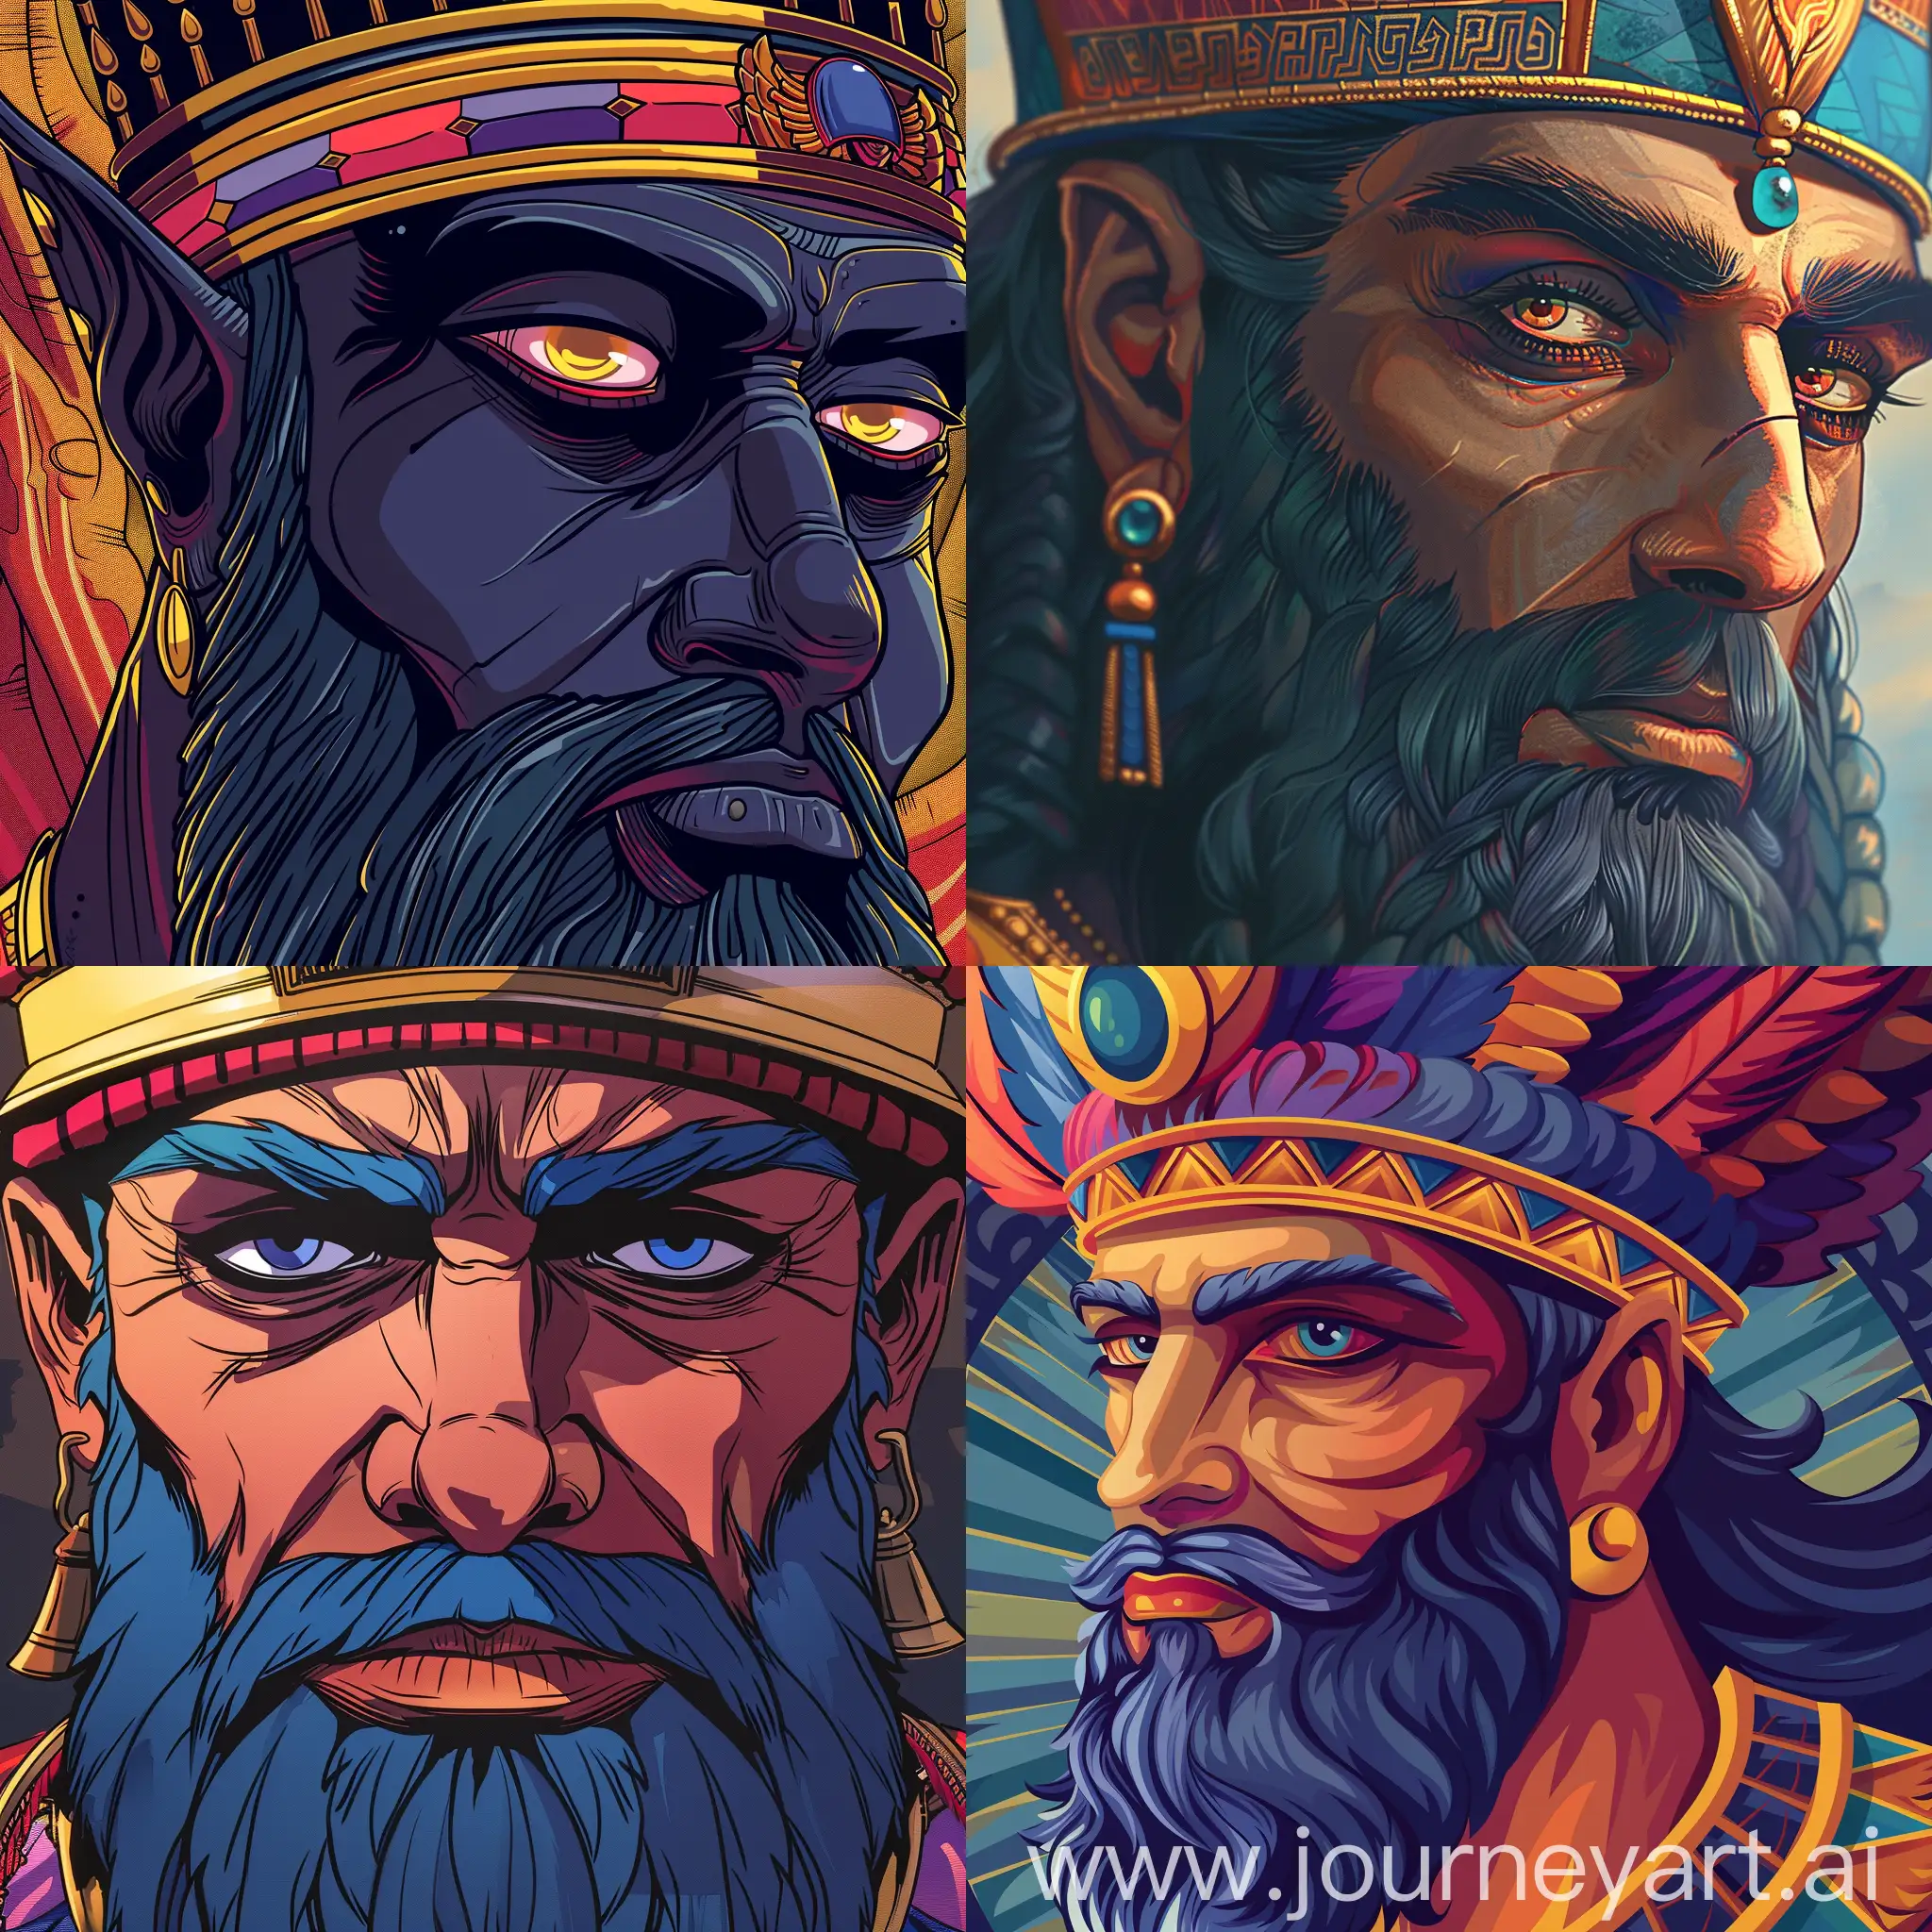 Closeup Anunnaki in Bible Times, deeply colorful in cartoon style, high quality detailed